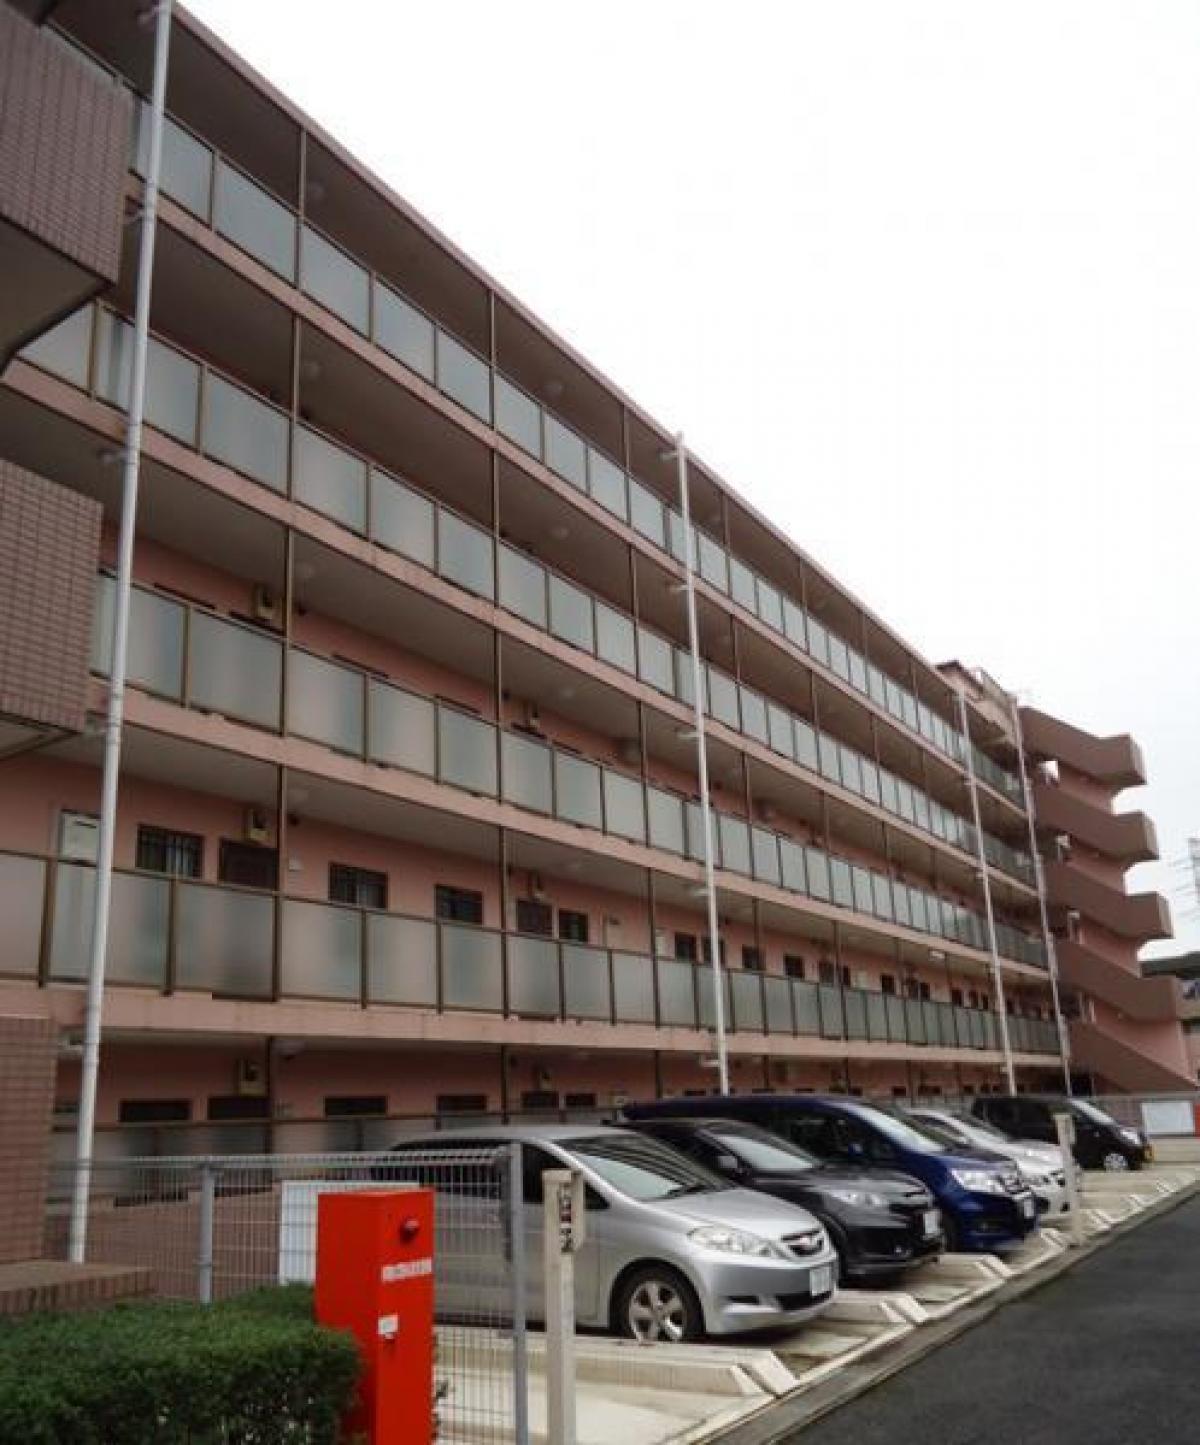 Picture of Apartment For Sale in Kamagaya Shi, Chiba, Japan